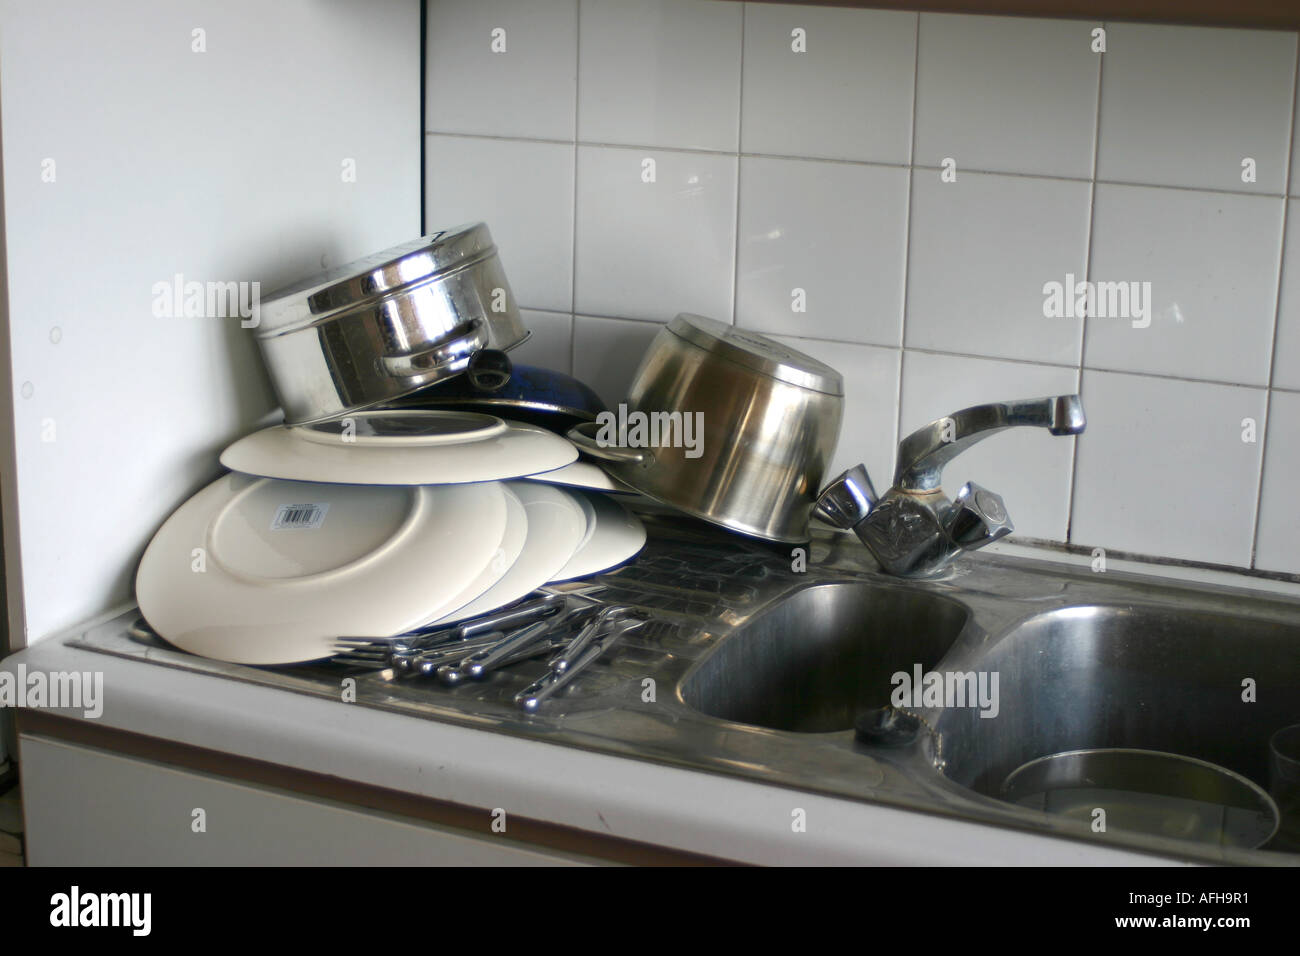 Messy kitchen sink with clean dishes Stock Photo - Alamy